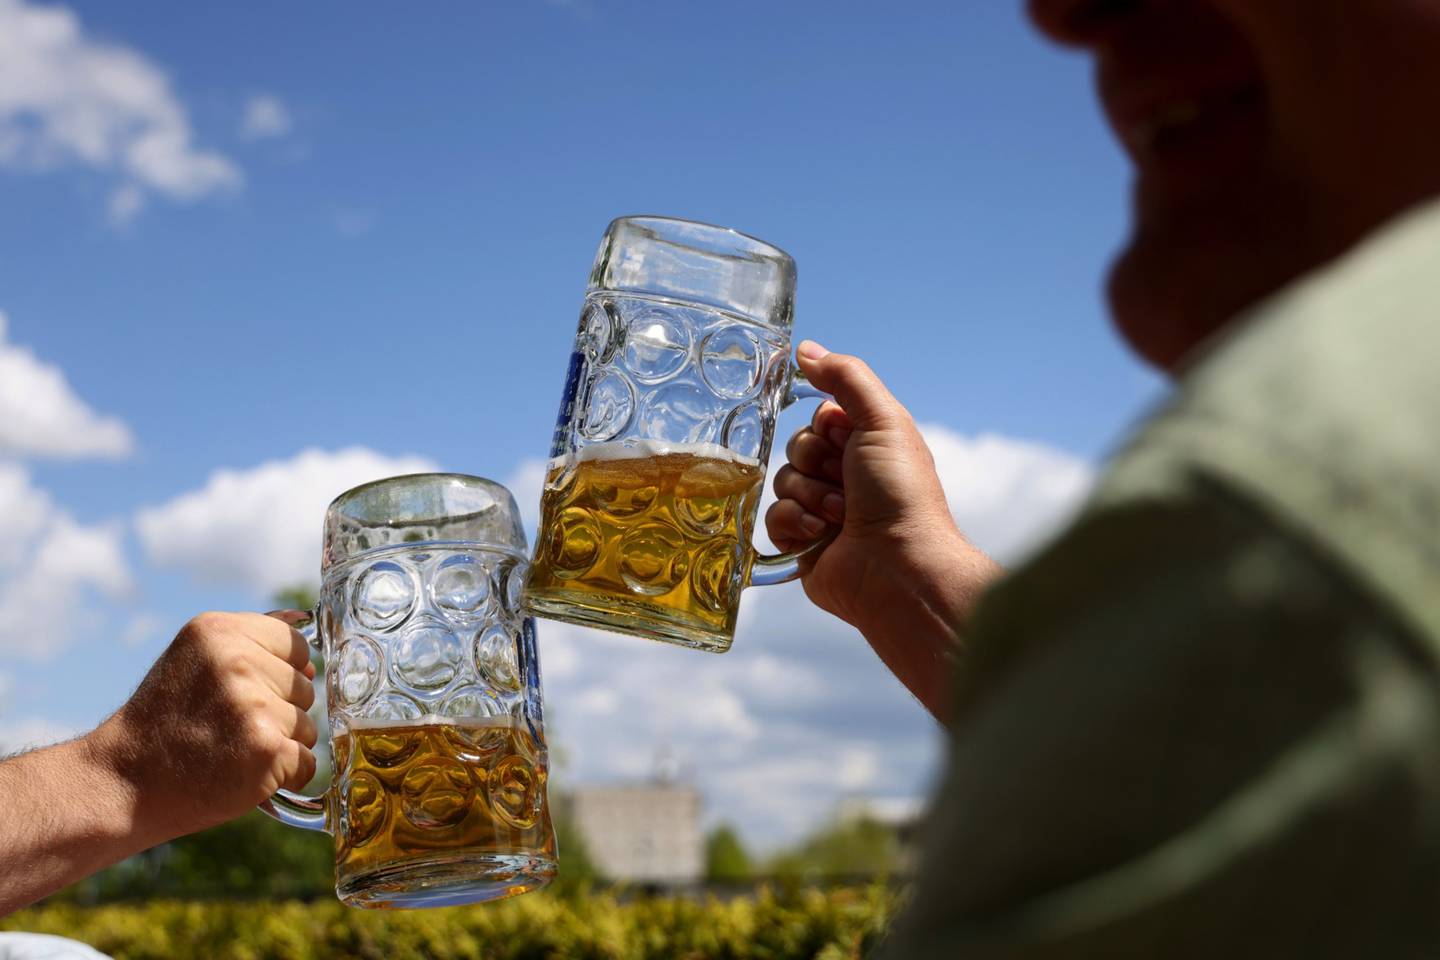 Beer drinkers in Germany are facing a shortage of bottles, partly because of the war in Ukraine.